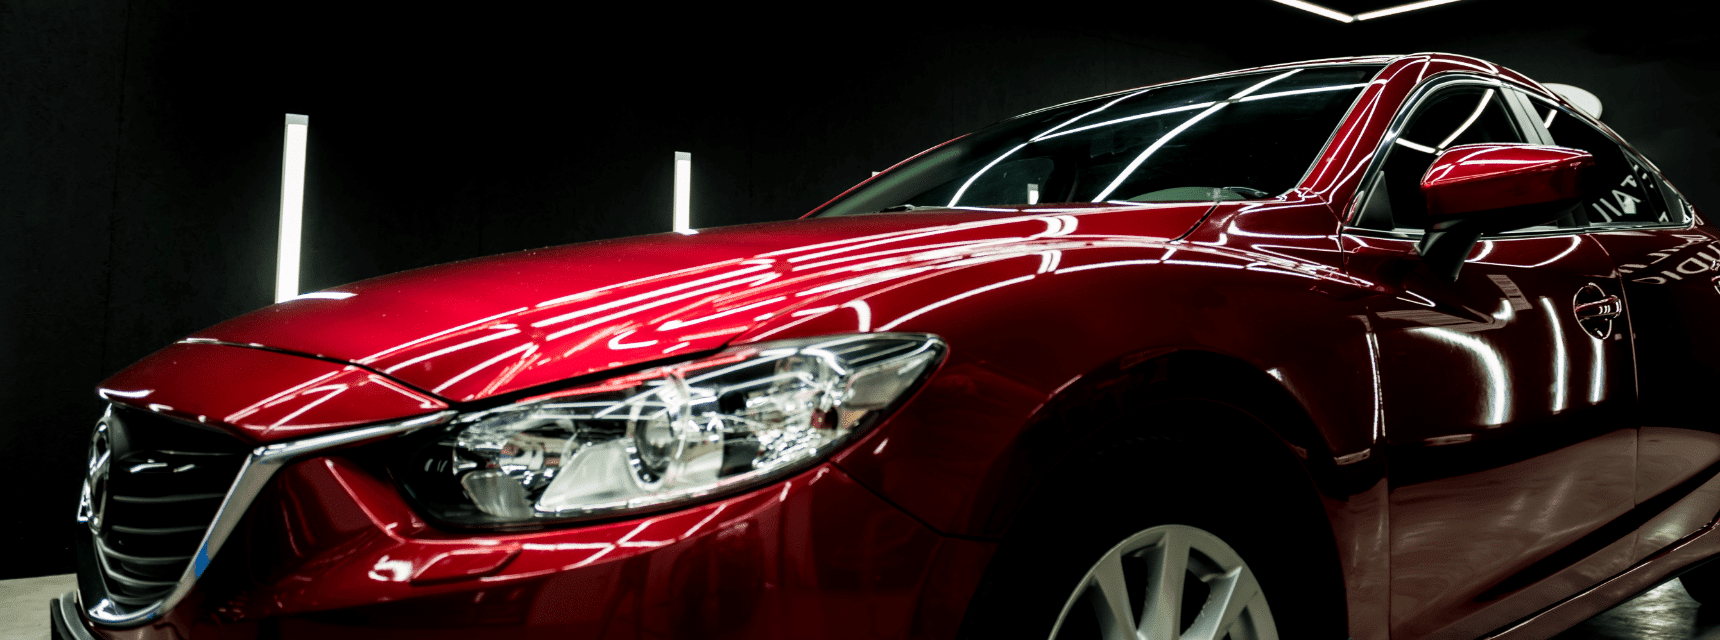 infrared-lamps-drying-car-body-parts-after-applying-save-gloss-coating